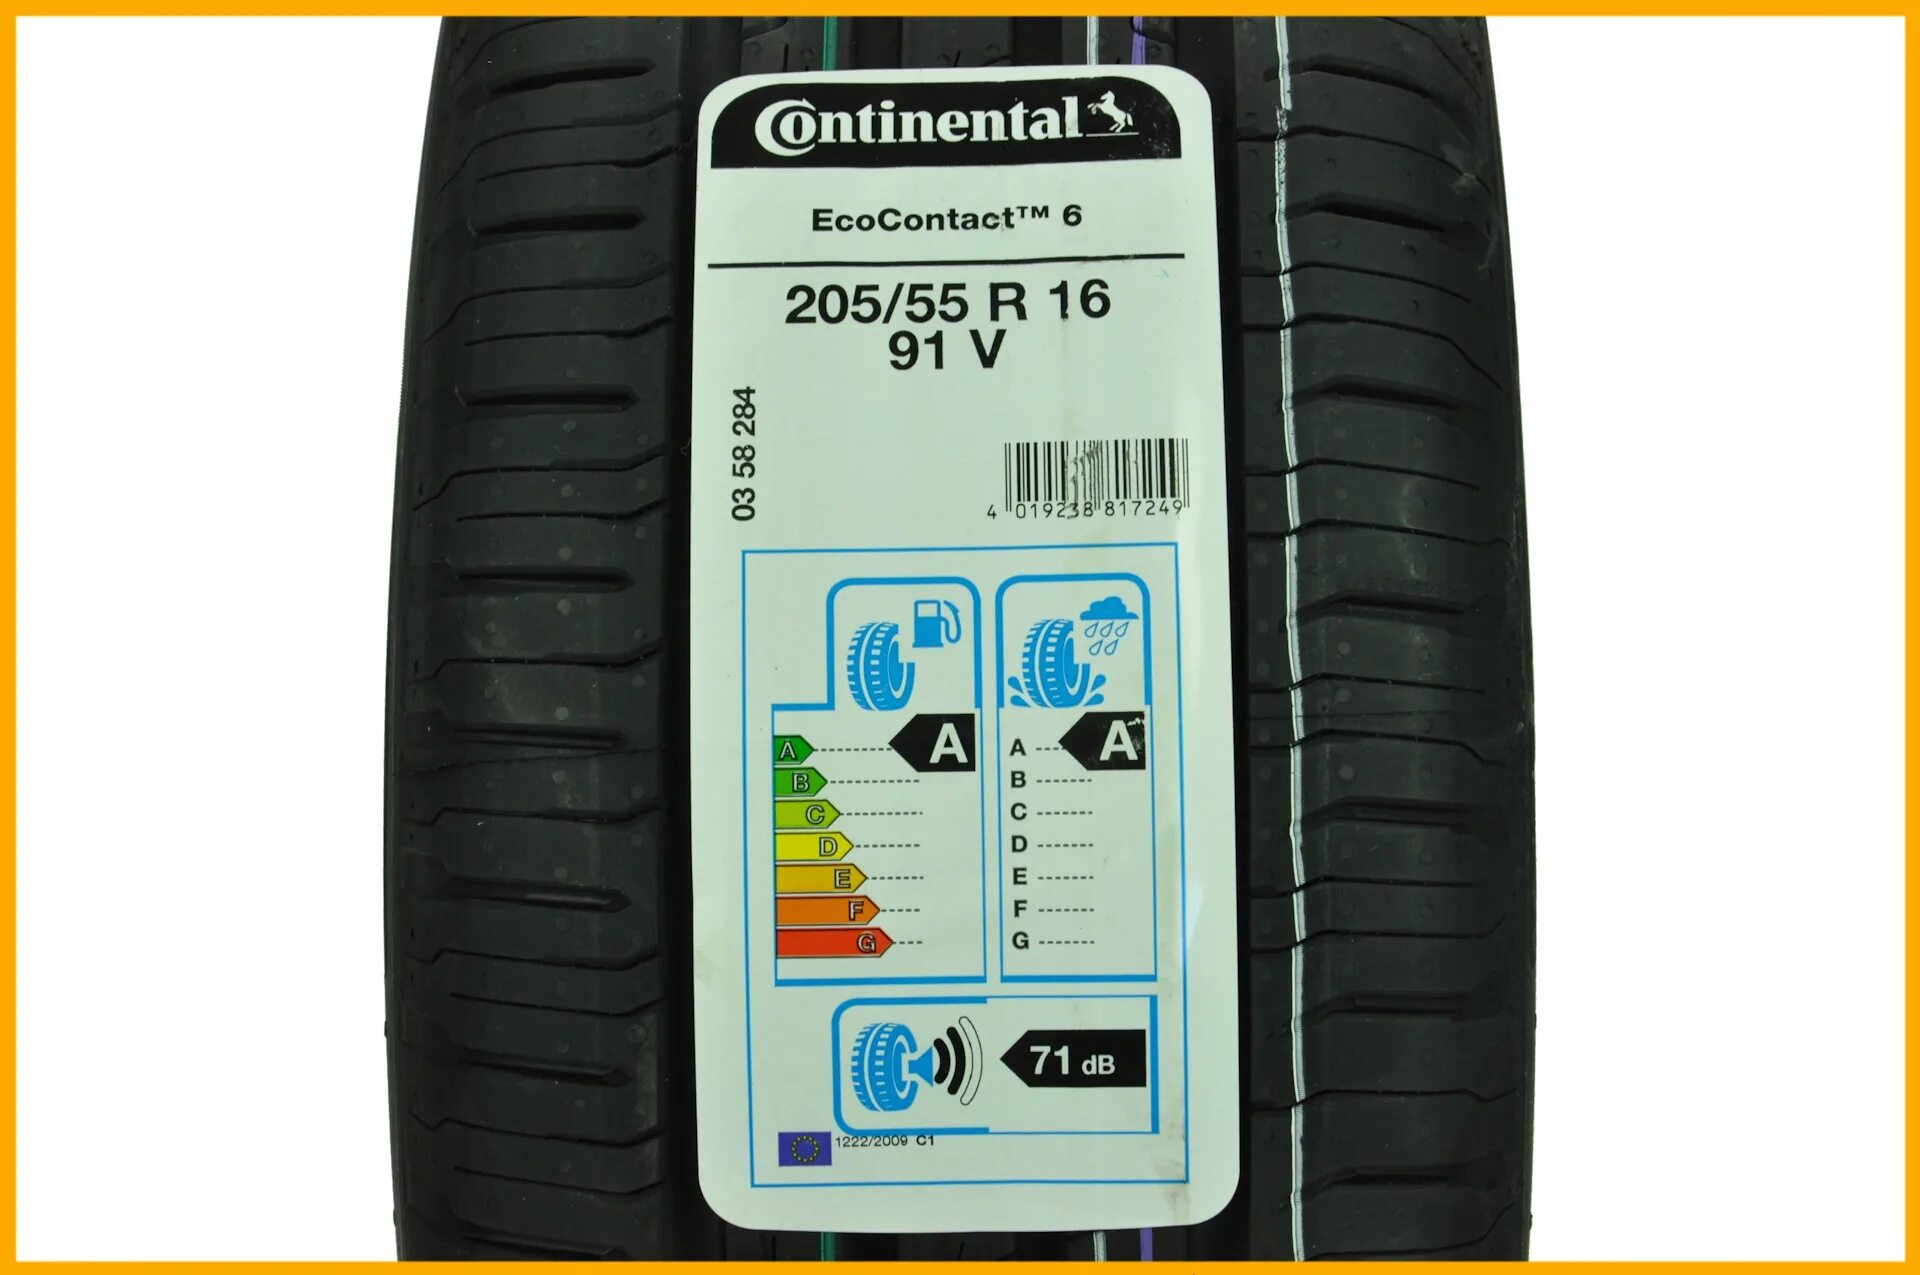 Continental ECOCONTACT 6 205/55 r16. Континенталь 205/55/16 v 91 CONTIECOCONTACT 6. Continental 205/55r16 91v ECOCONTACT 6 TL. Continental PREMIUMCONTACT 6 215/55 r18 евроэтикетка. Continental contipremiumcontact 6 205 55 r16